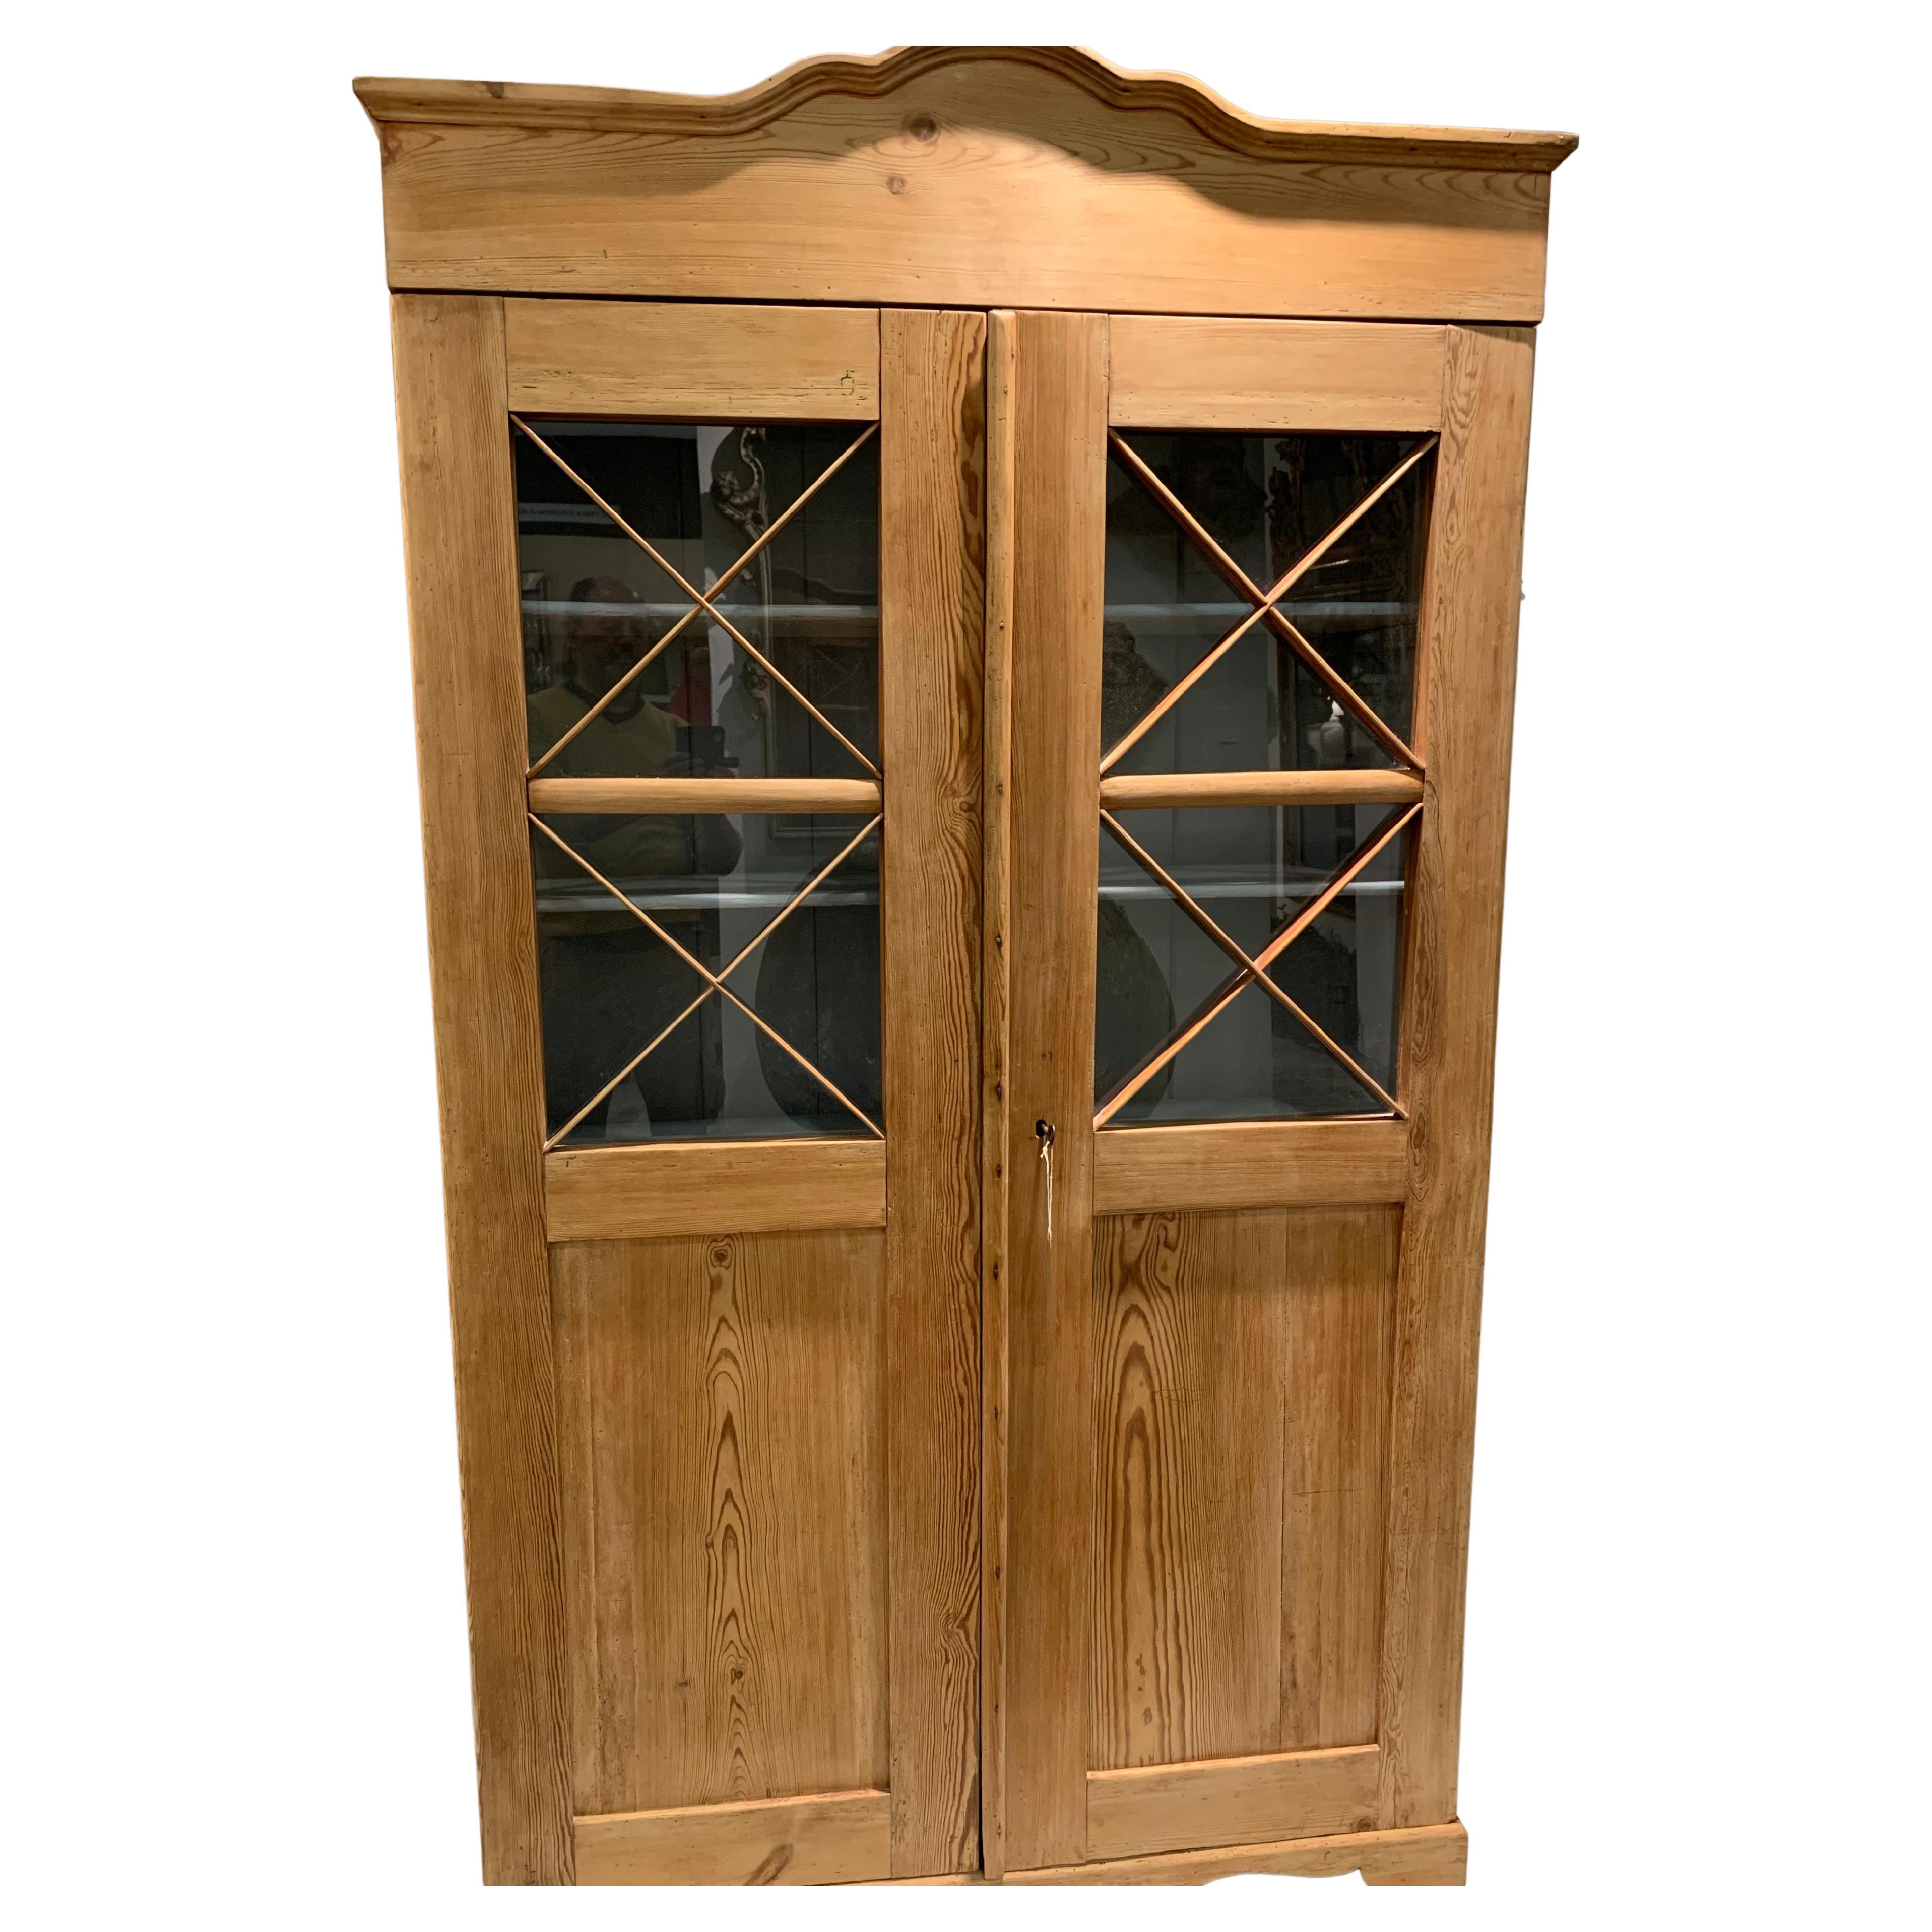 Handsome two door pine cupboard/ cabinet.
This is a lovely understated and useful cabinet which looks great in the flesh.
In one piece, it has a shaped cornice, glazing to the top half of the doors with astragal detail.
The interior has four